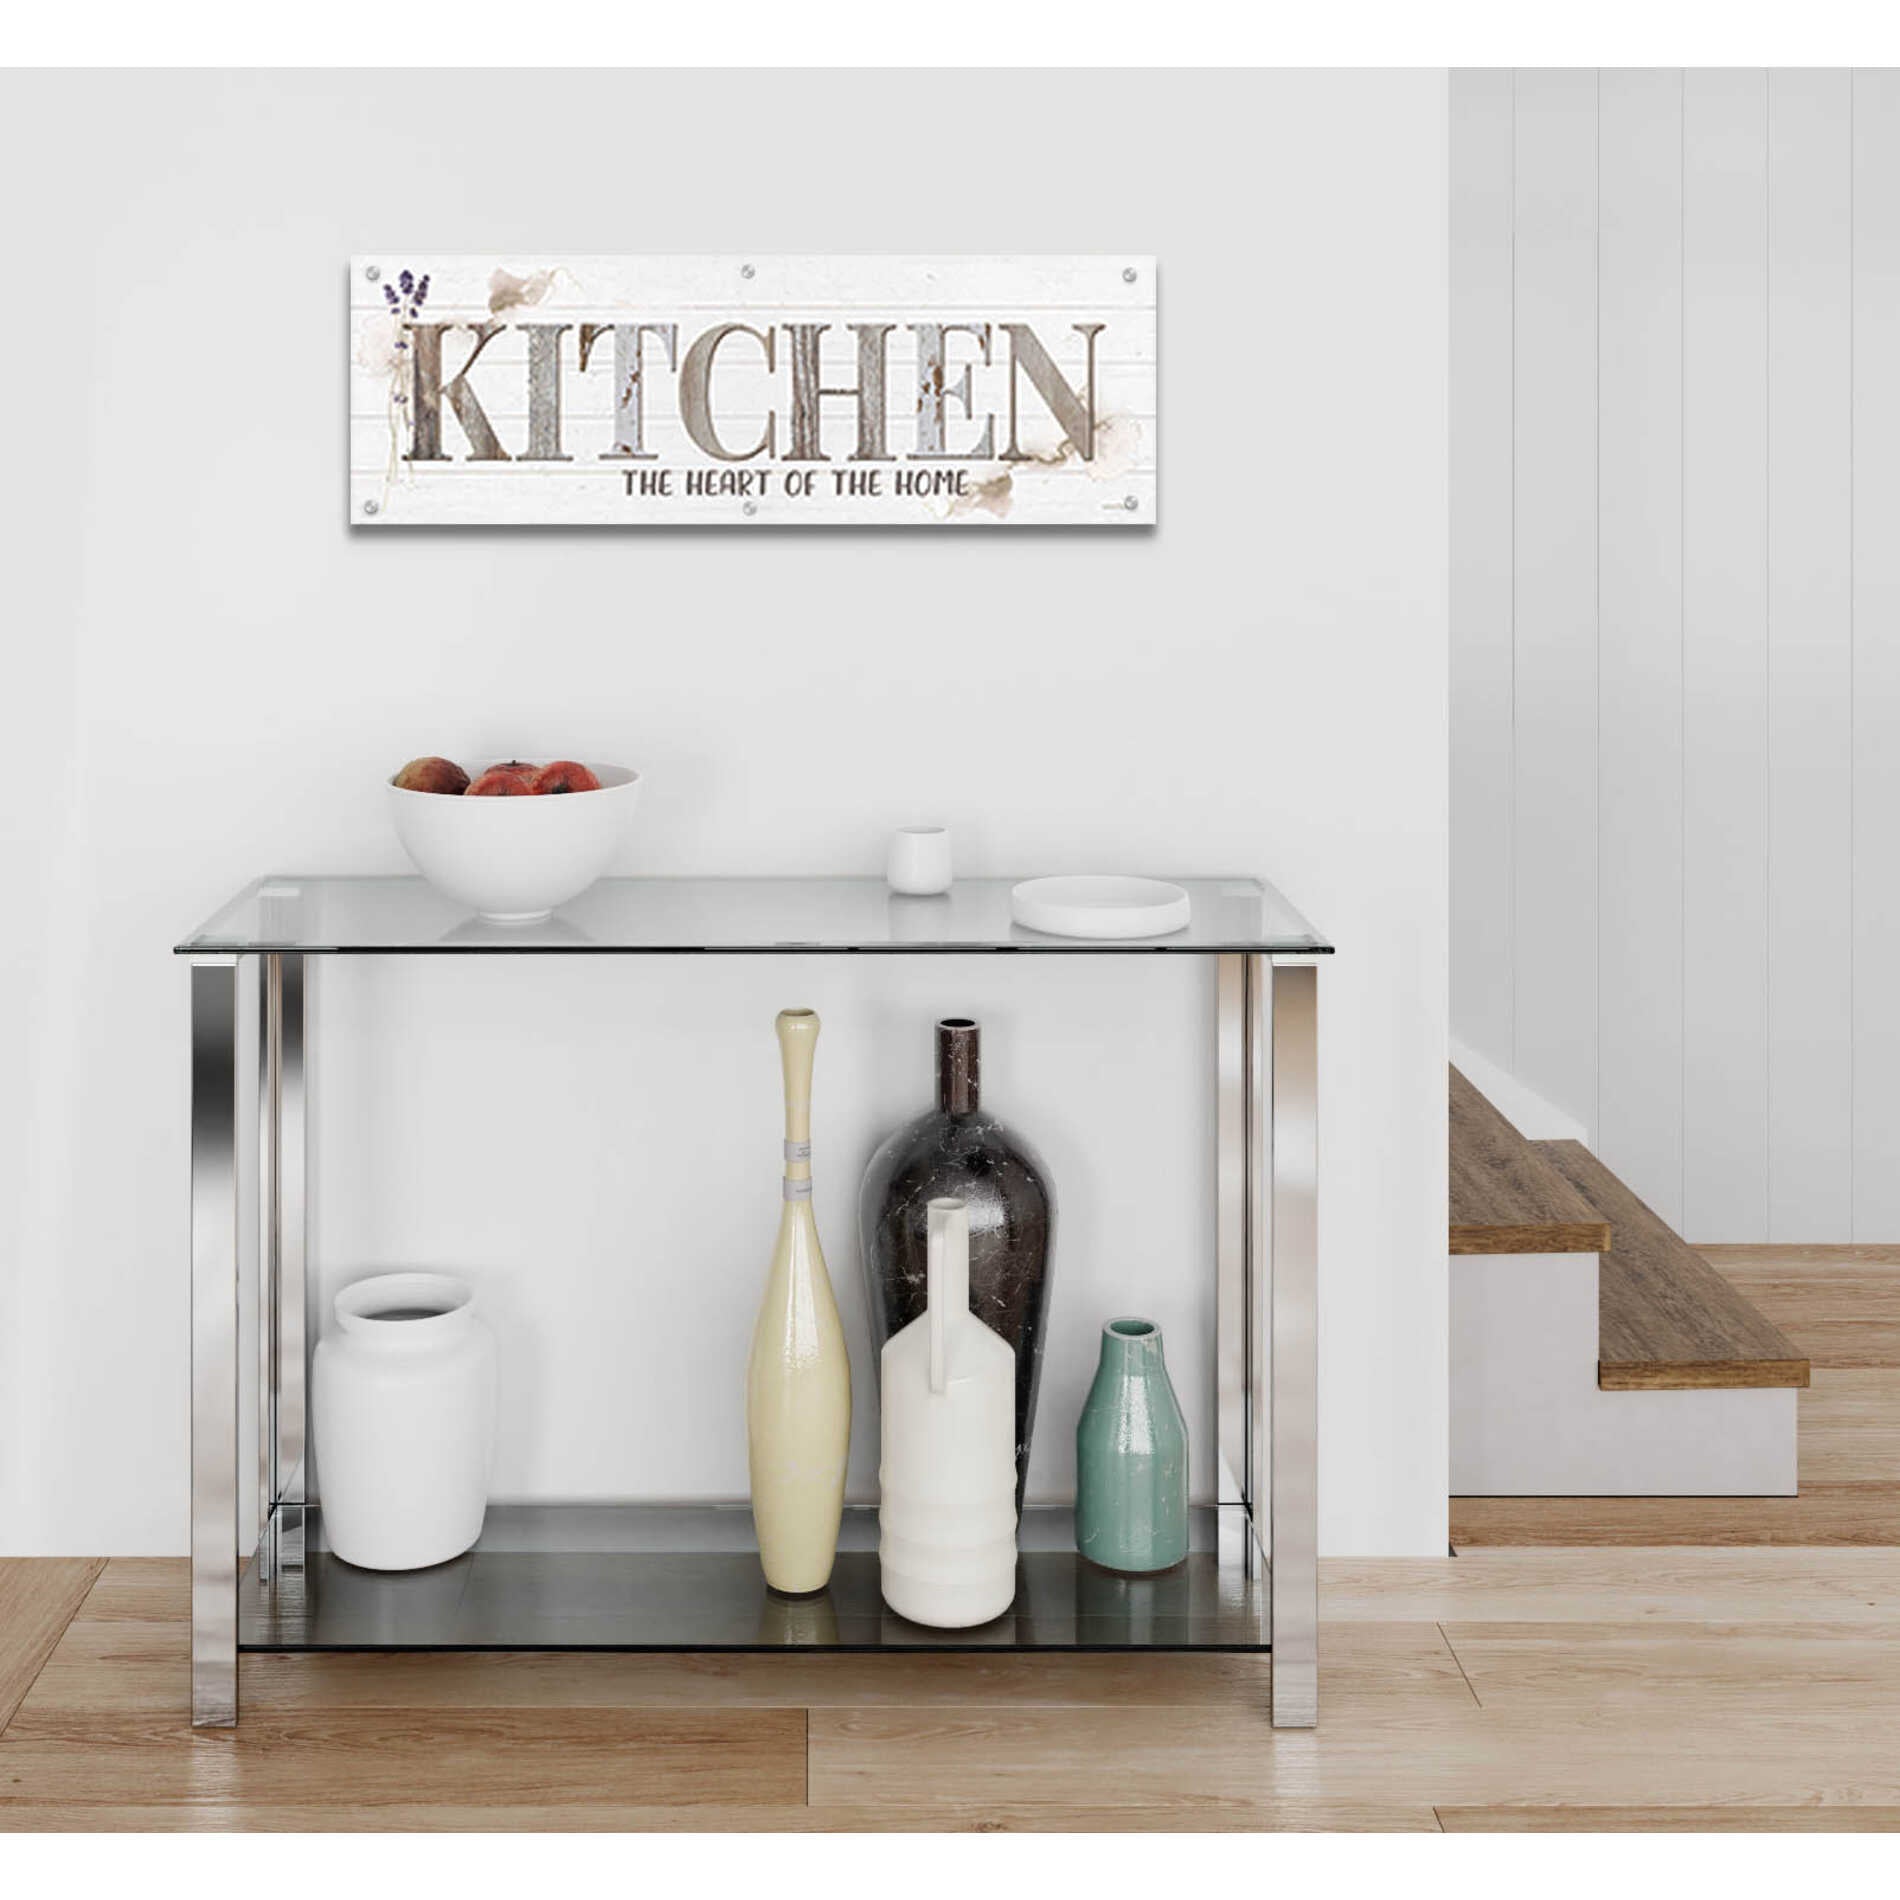 Epic Art 'Kitchen the Heart of the Home' by Susie Boyer, Acrylic Glass Wall Art,36x12